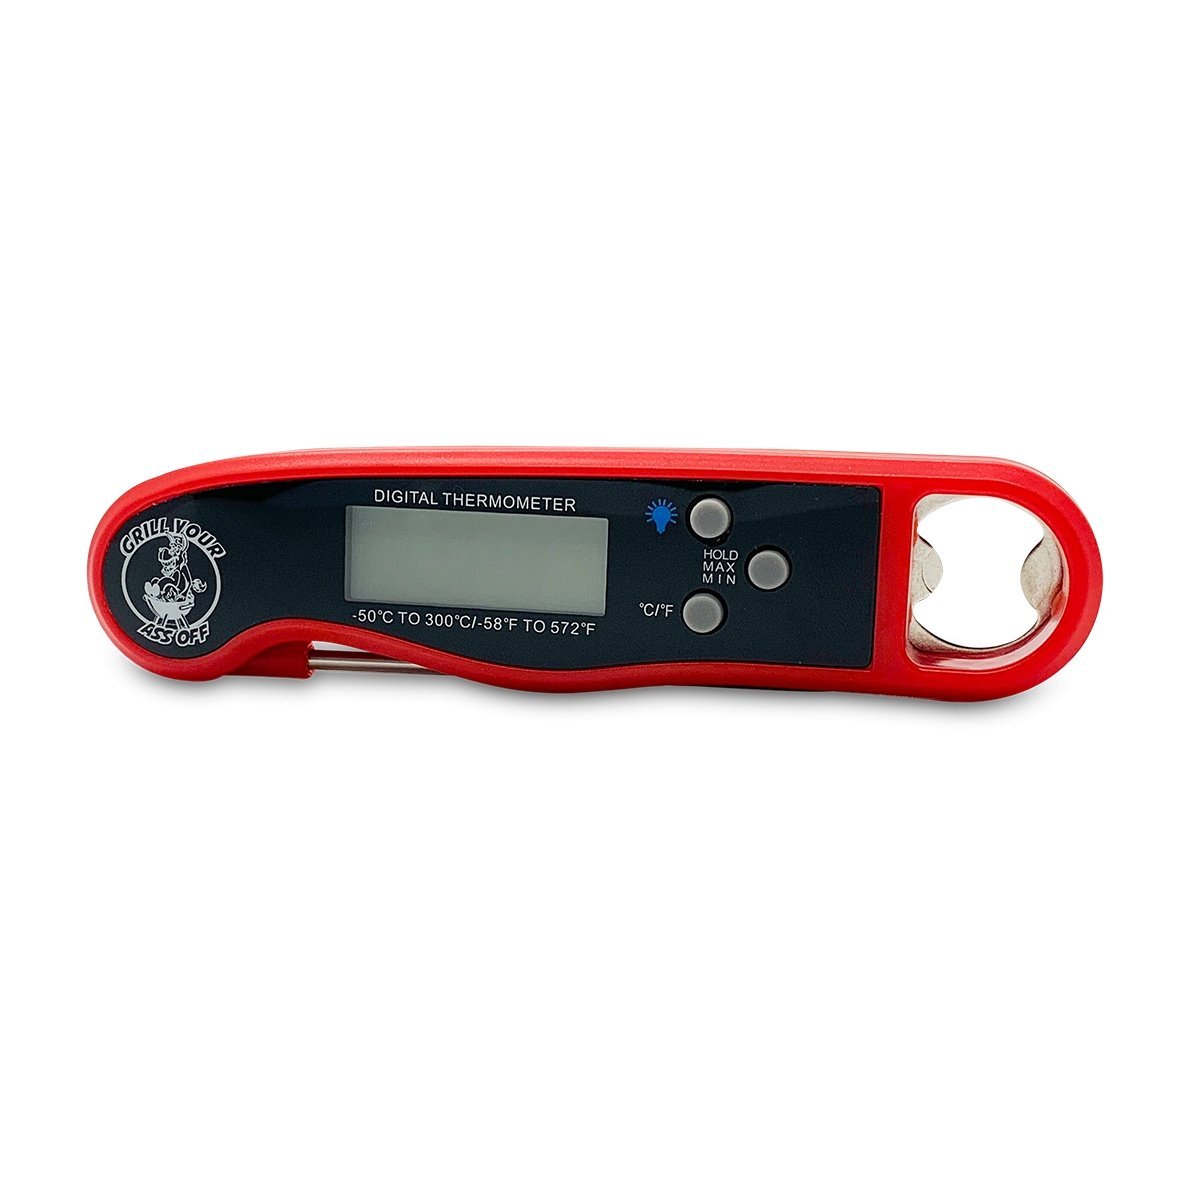 https://cdn.shopify.com/s/files/1/2361/0321/products/instant-read-thermometer-793149.jpg?v=1658785397&width=1280